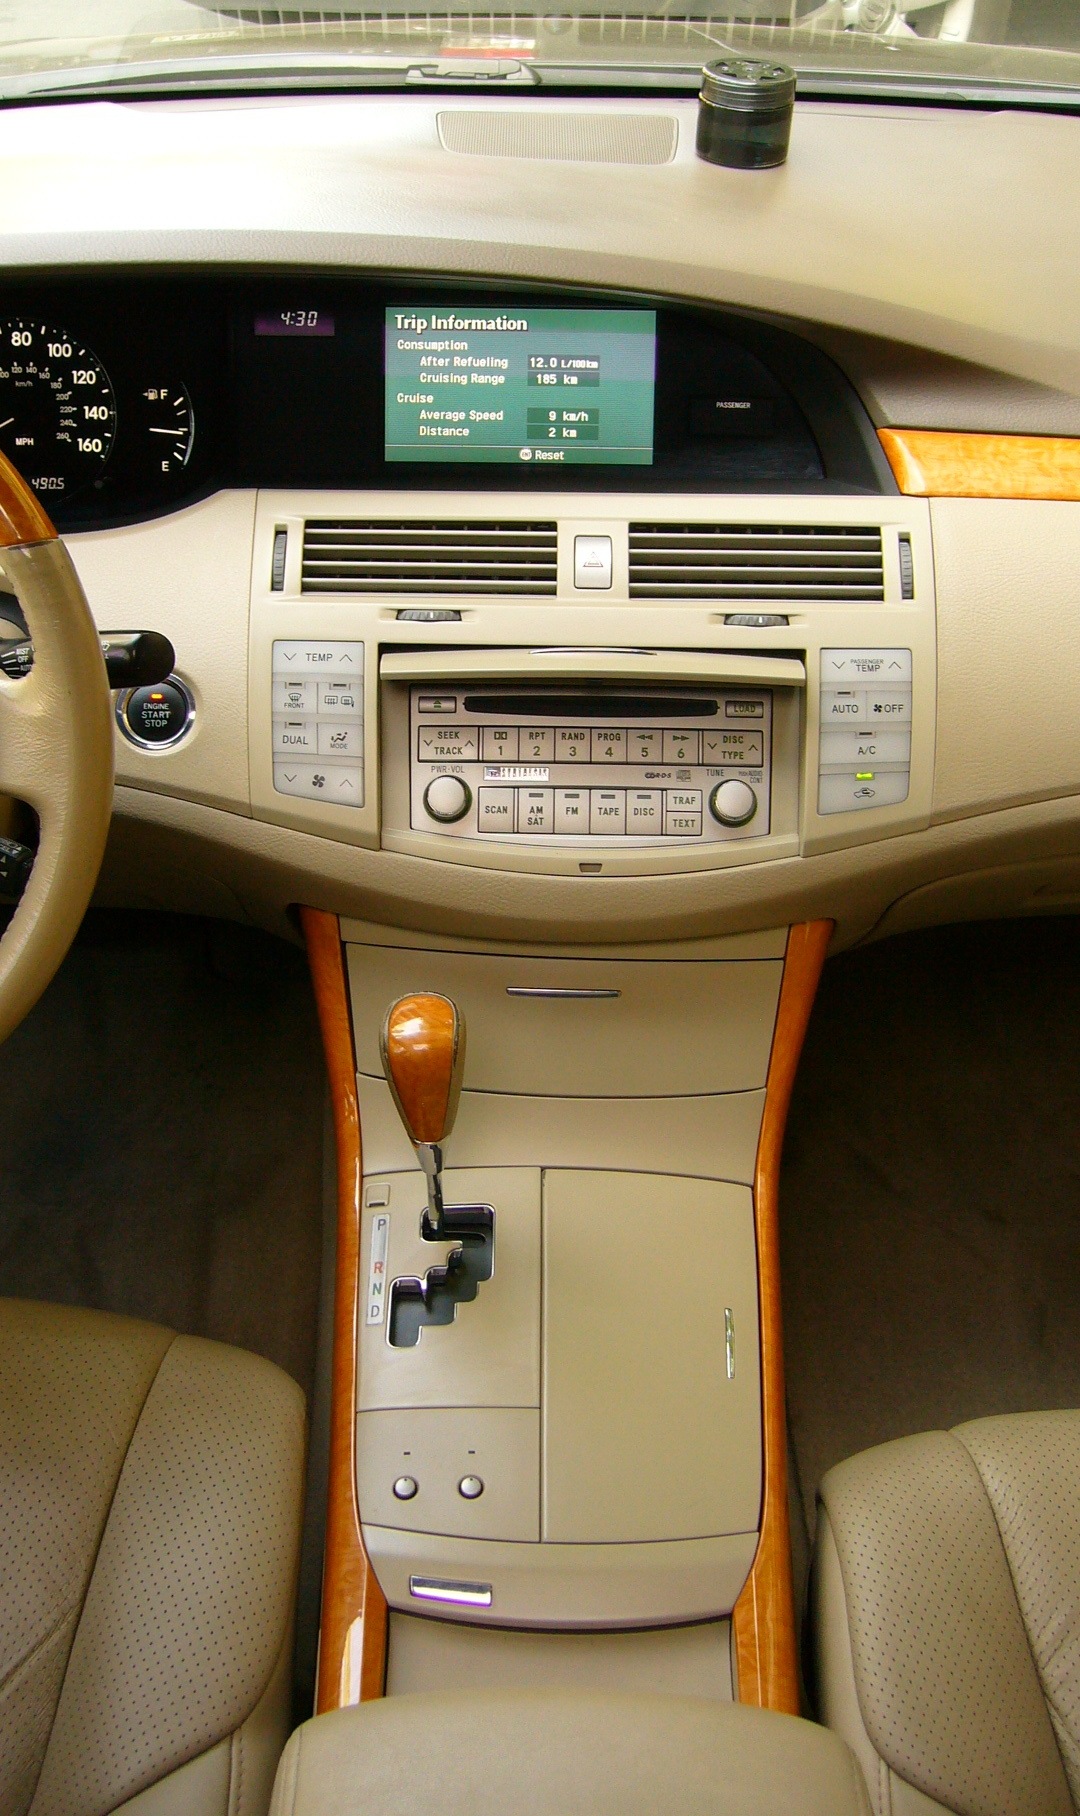 The result of painting the panels of the center console  - Toyota Avalon 35 L 2007